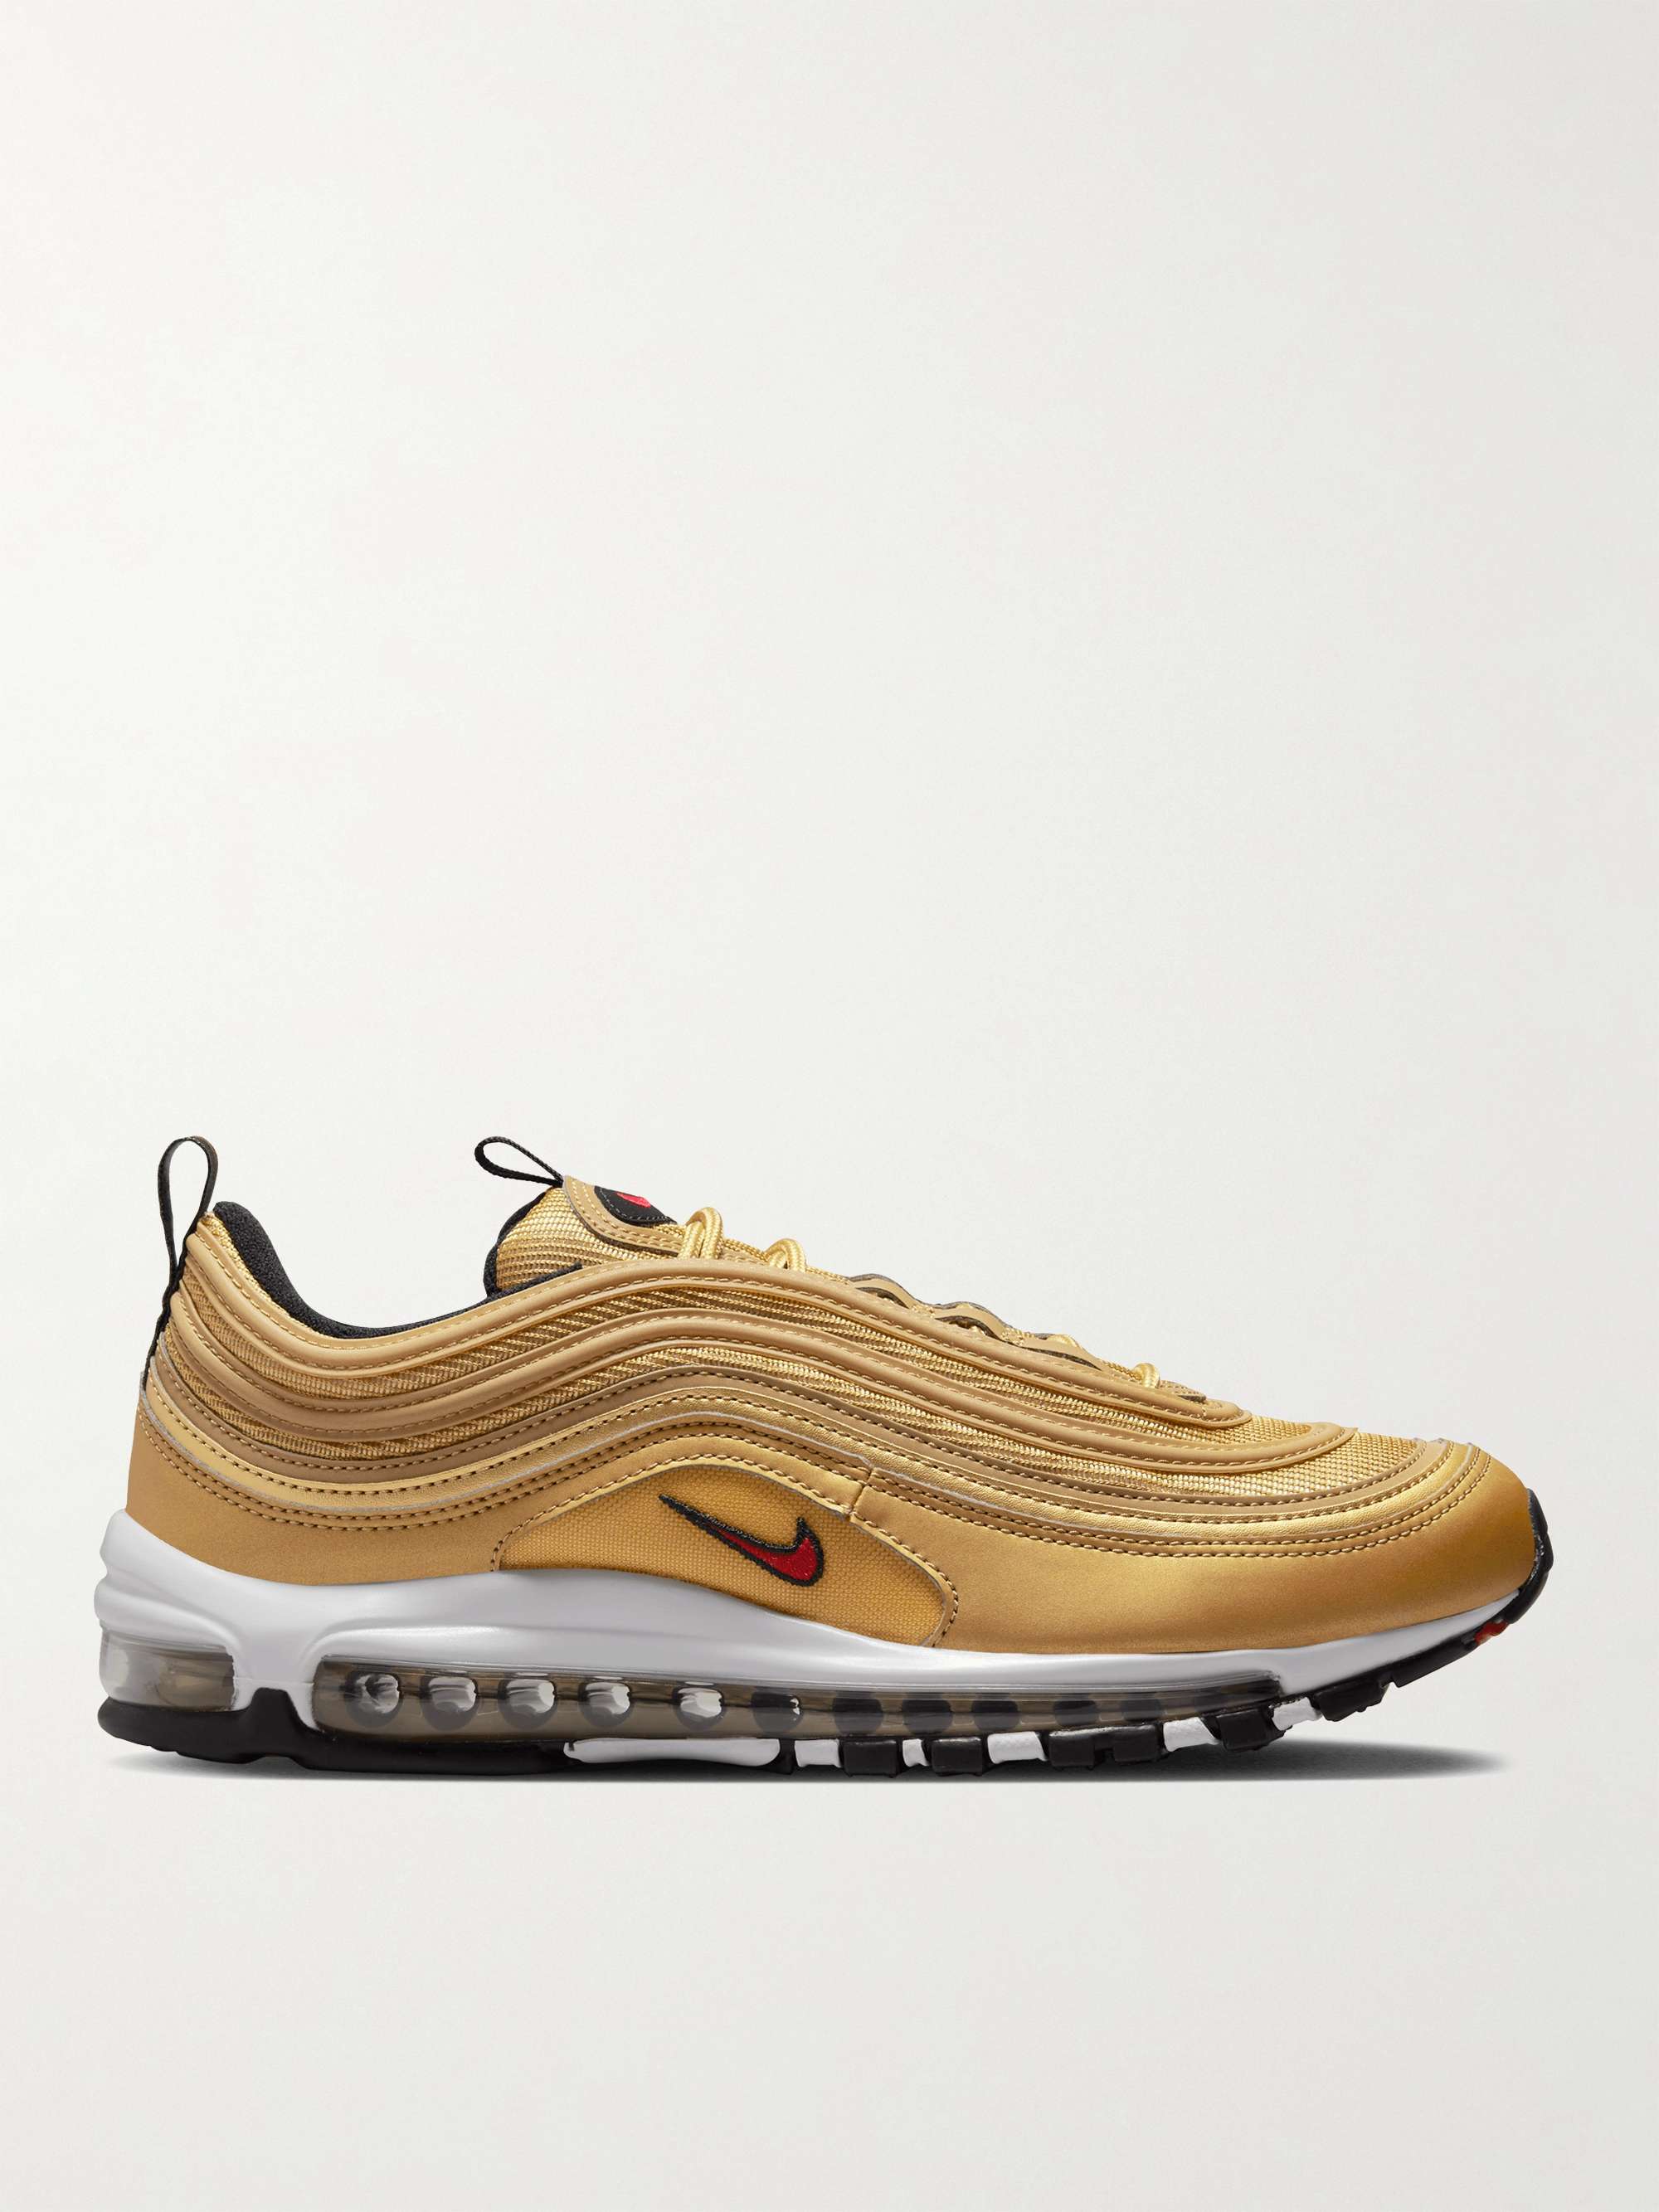 Gold Air Max 97 Metallic Leather and Mesh Sneakers | NIKE | MR PORTER